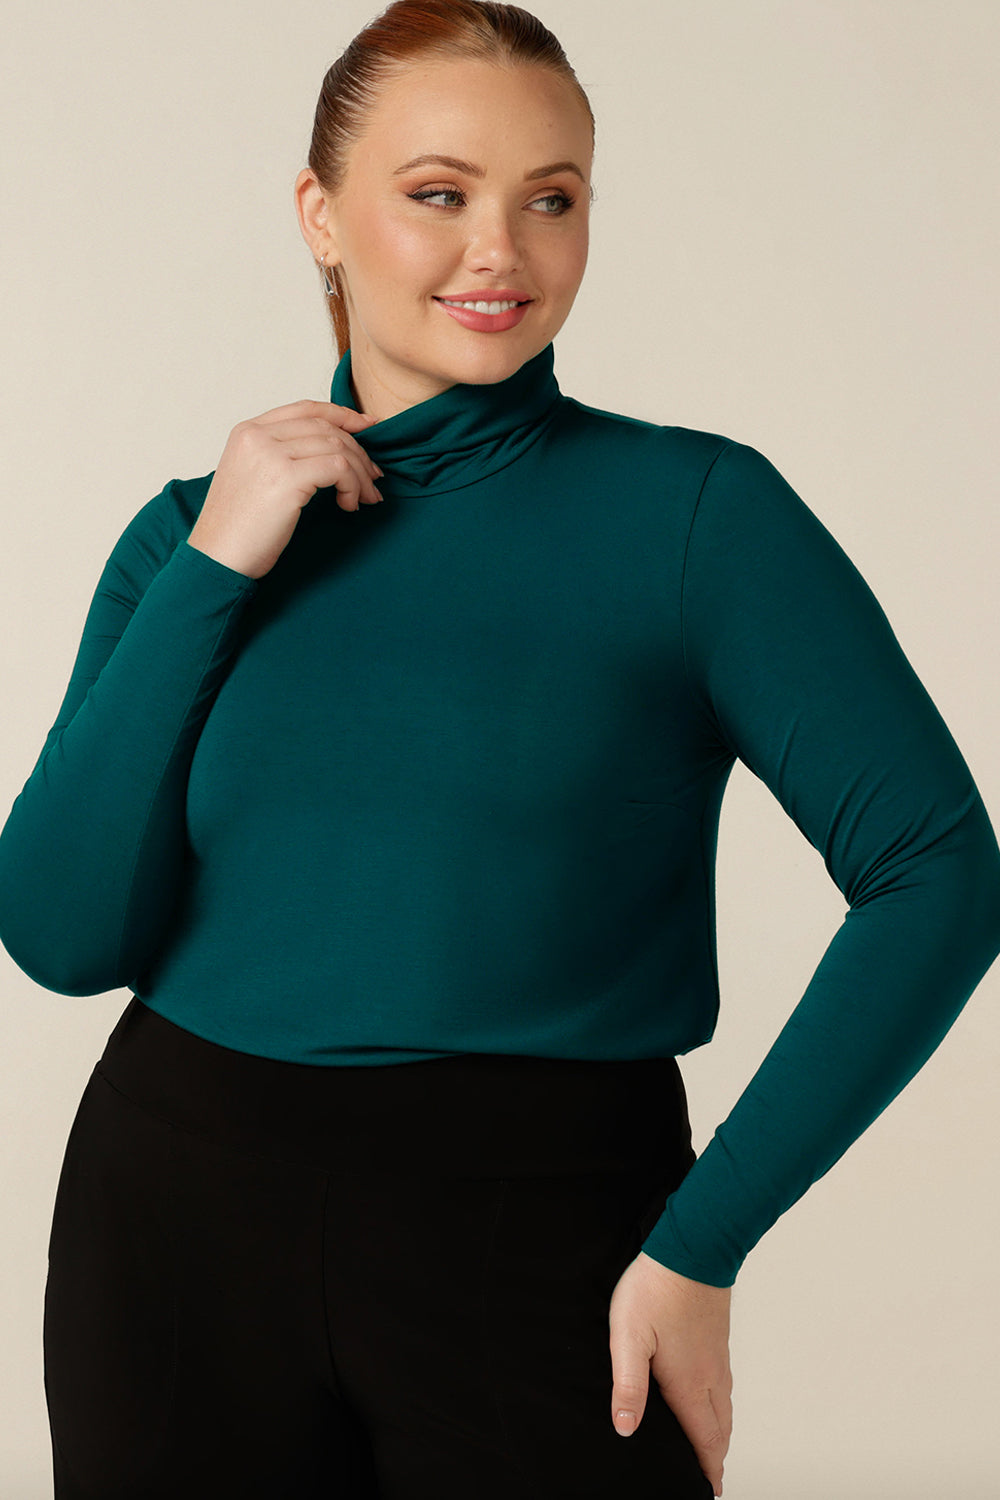 A size 12, curvy women wears a long-sleeve, turtle neck top in petrol green bamboo jersey. MAde in Australia by Australian and New Zealand women's clothing label, L&F this natural fibre top is lightweight and breathable - a goof top for winter layering!